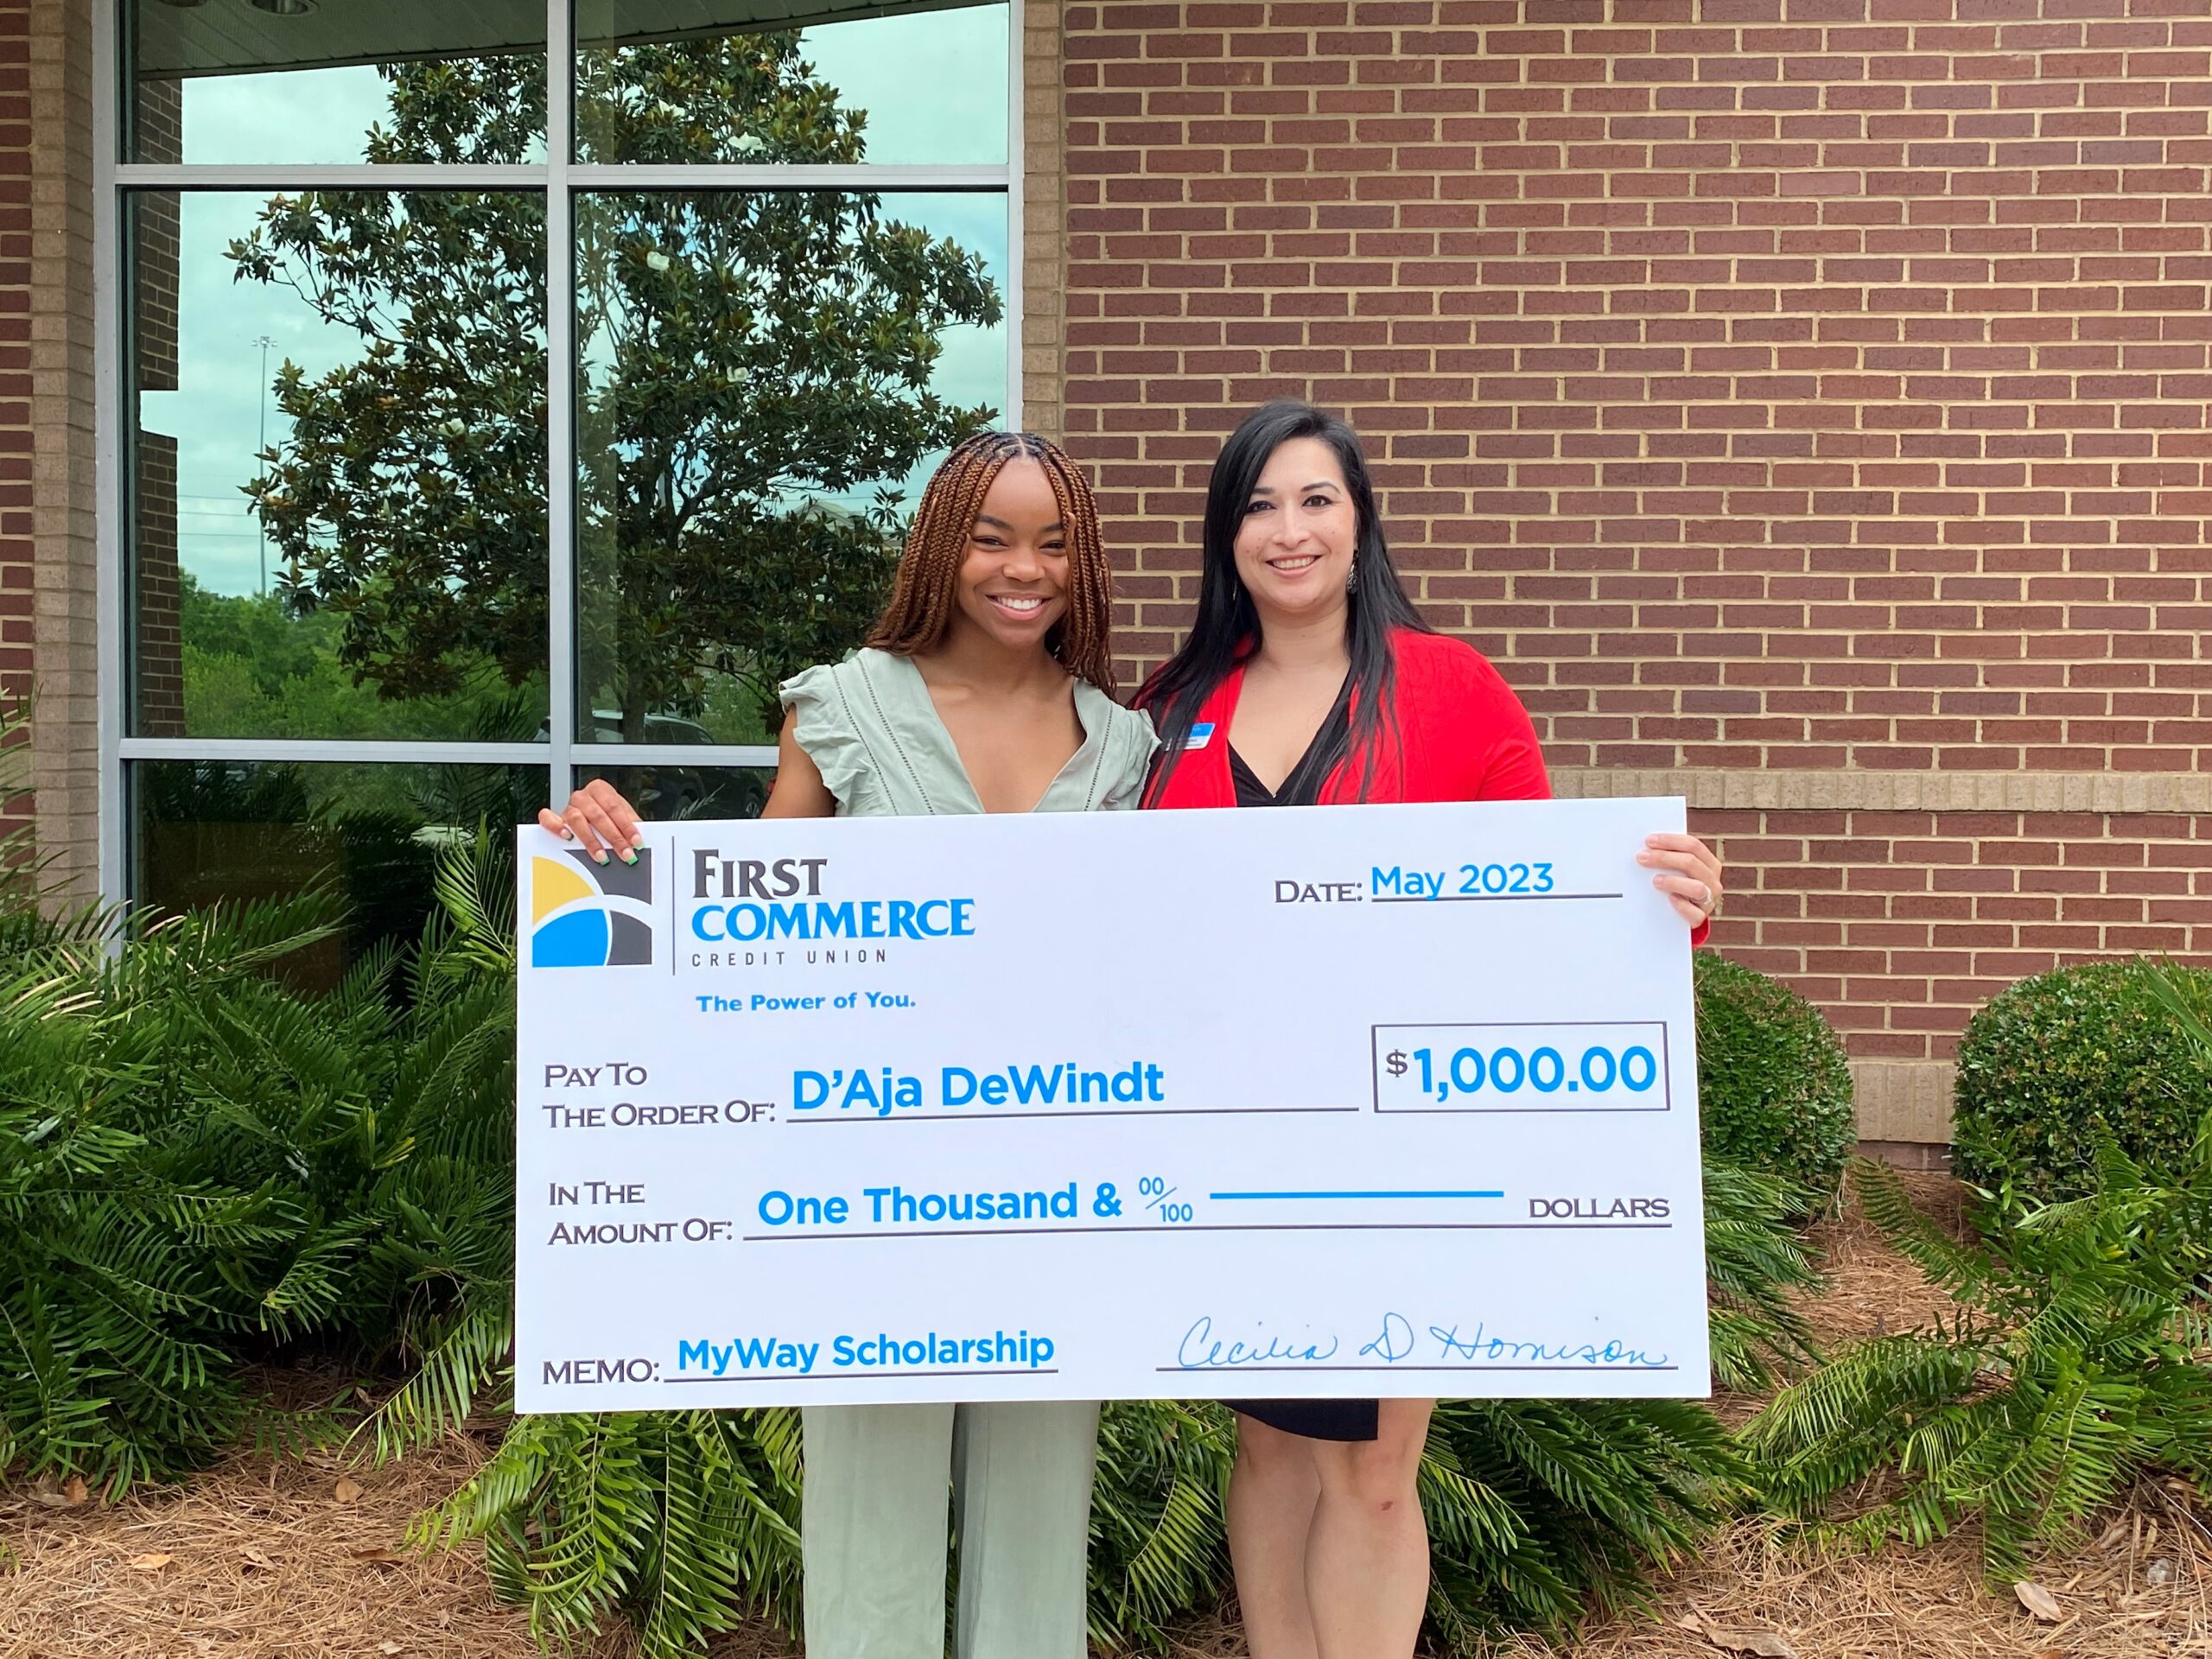 First Commerce Credit Union Empowers Financial Futures by Awarding Four $1,000 MyWay Scholarships to Local Students